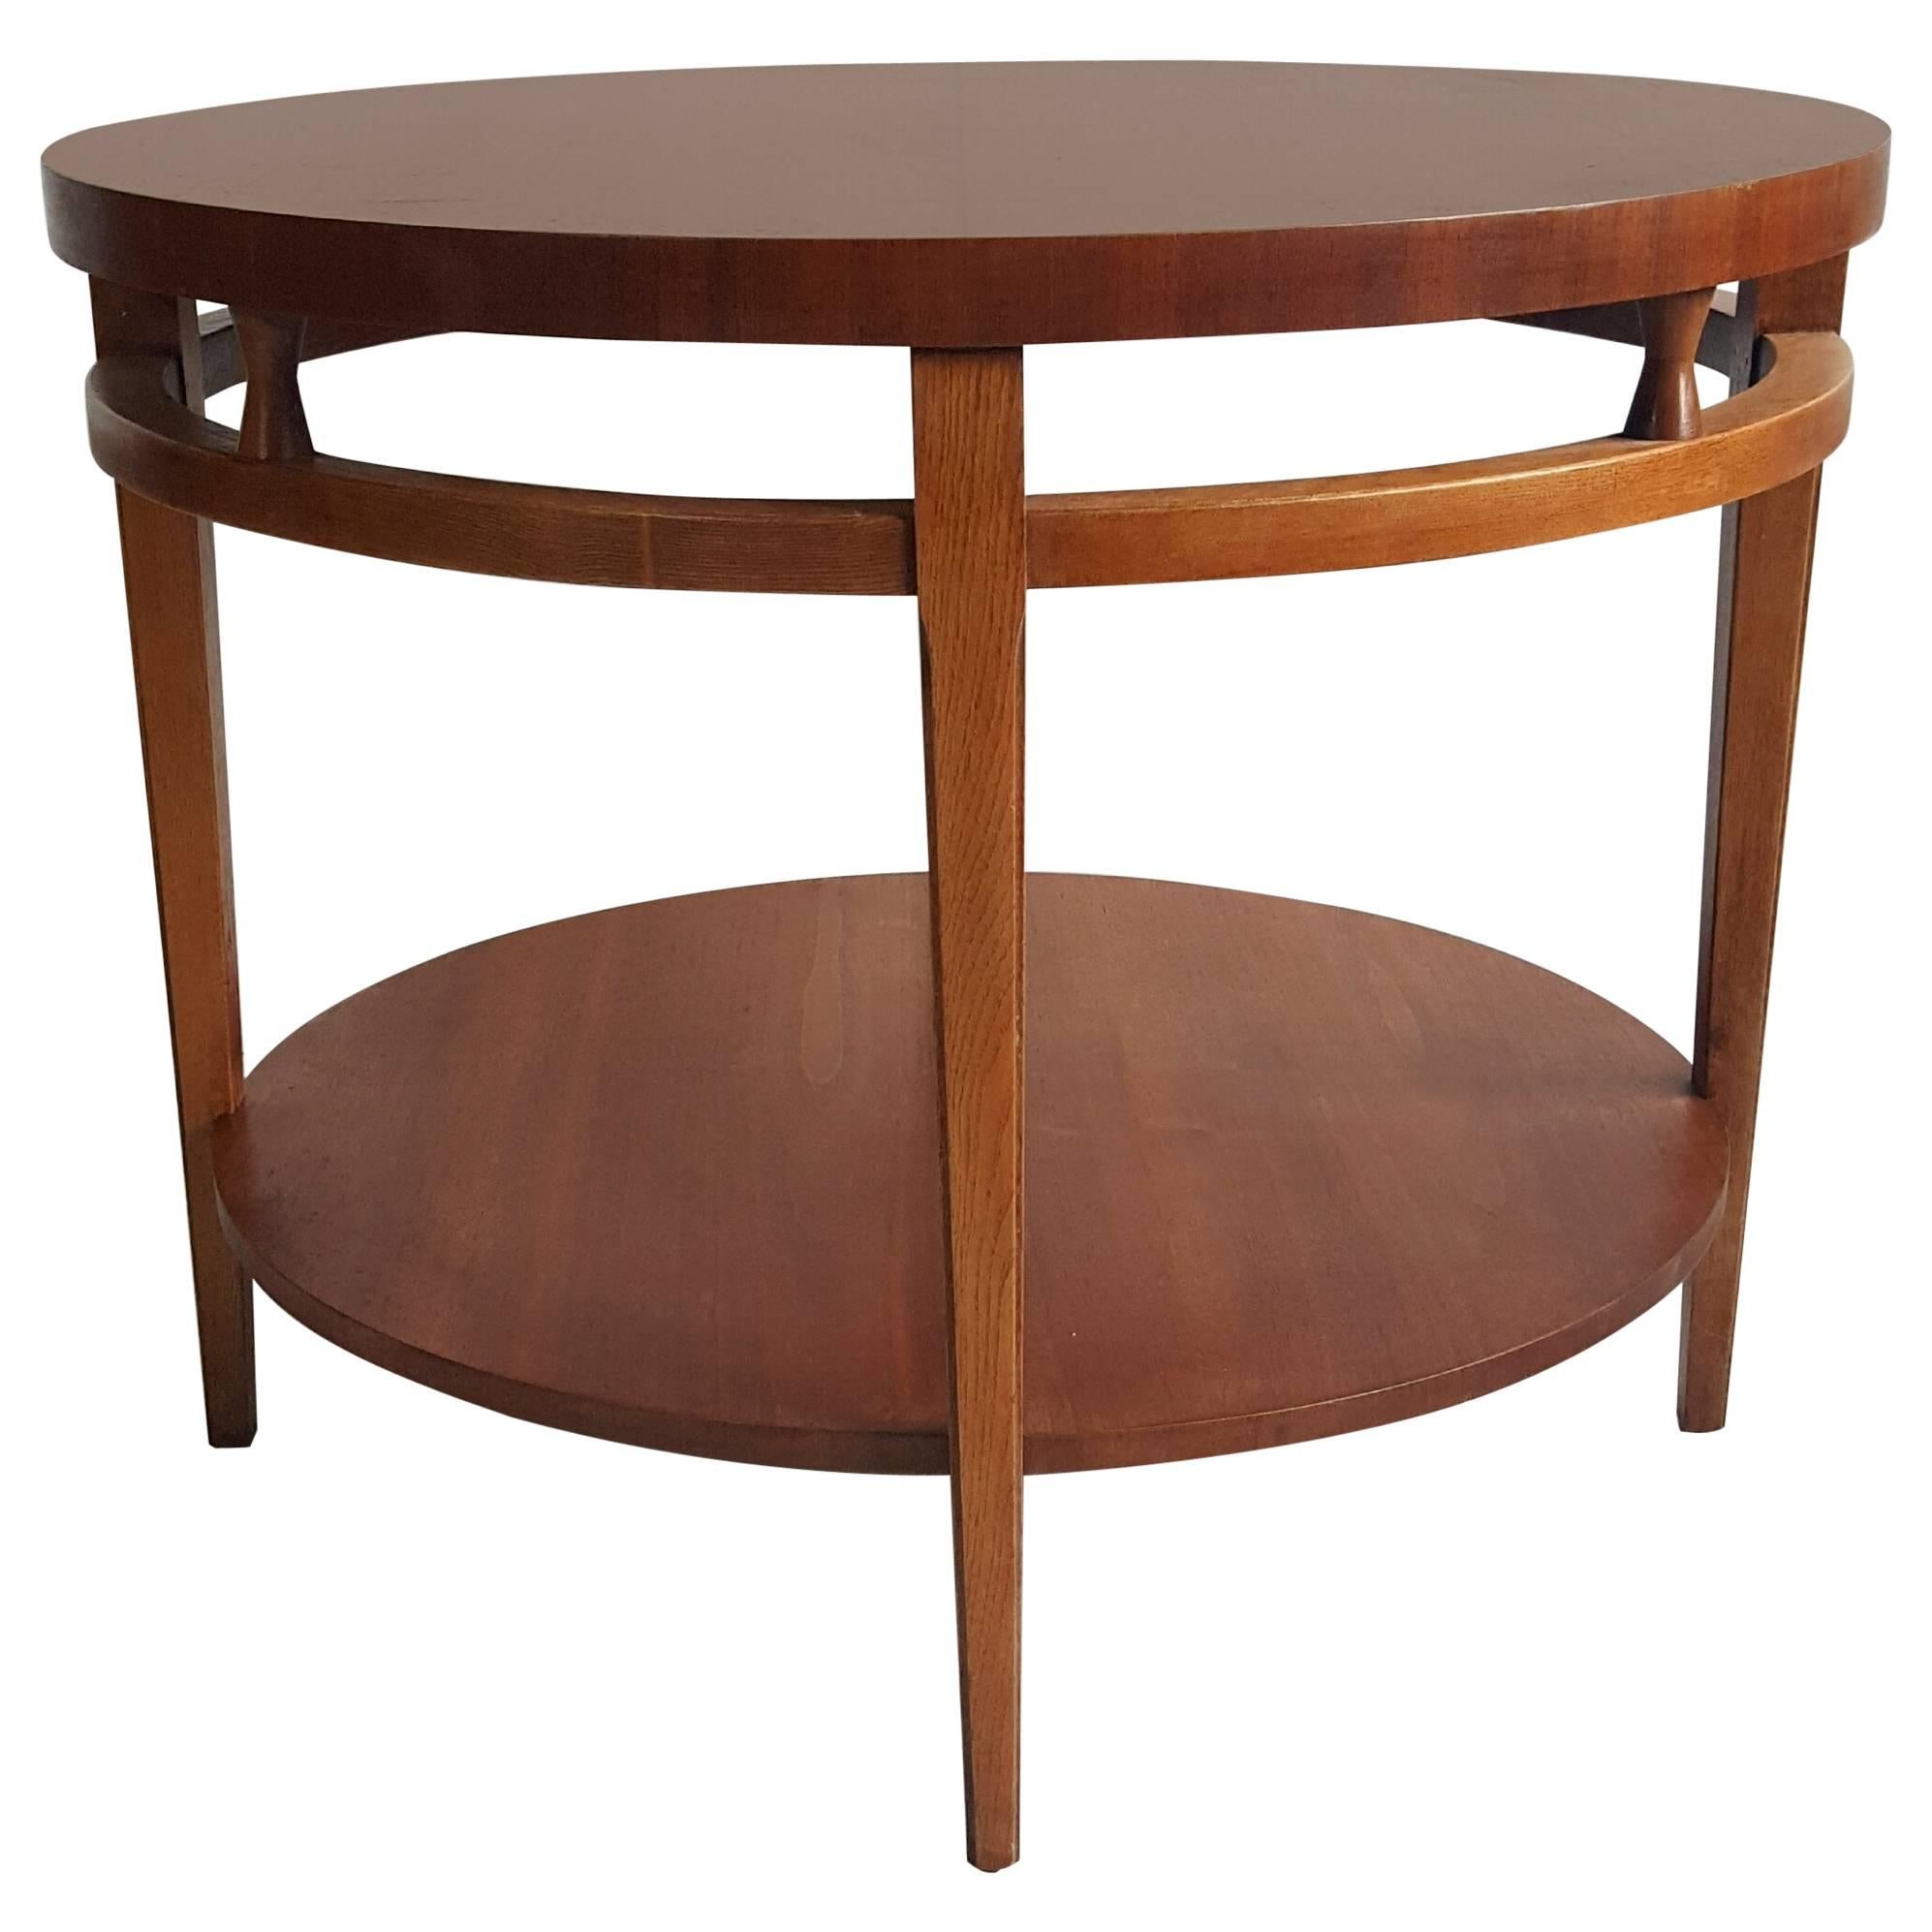 Modernist Walnut and Rosewood Lamp Table 'Tuxedo" by Lane